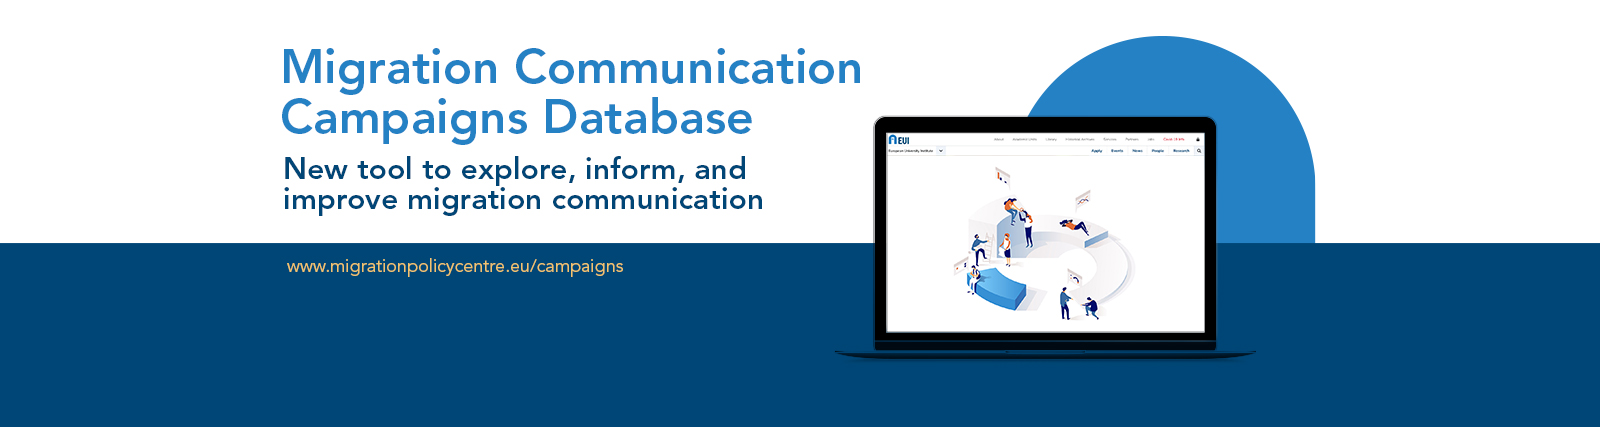 Permalink to:Today we are thrilled to launch the Migration Communication Campaigns Database!